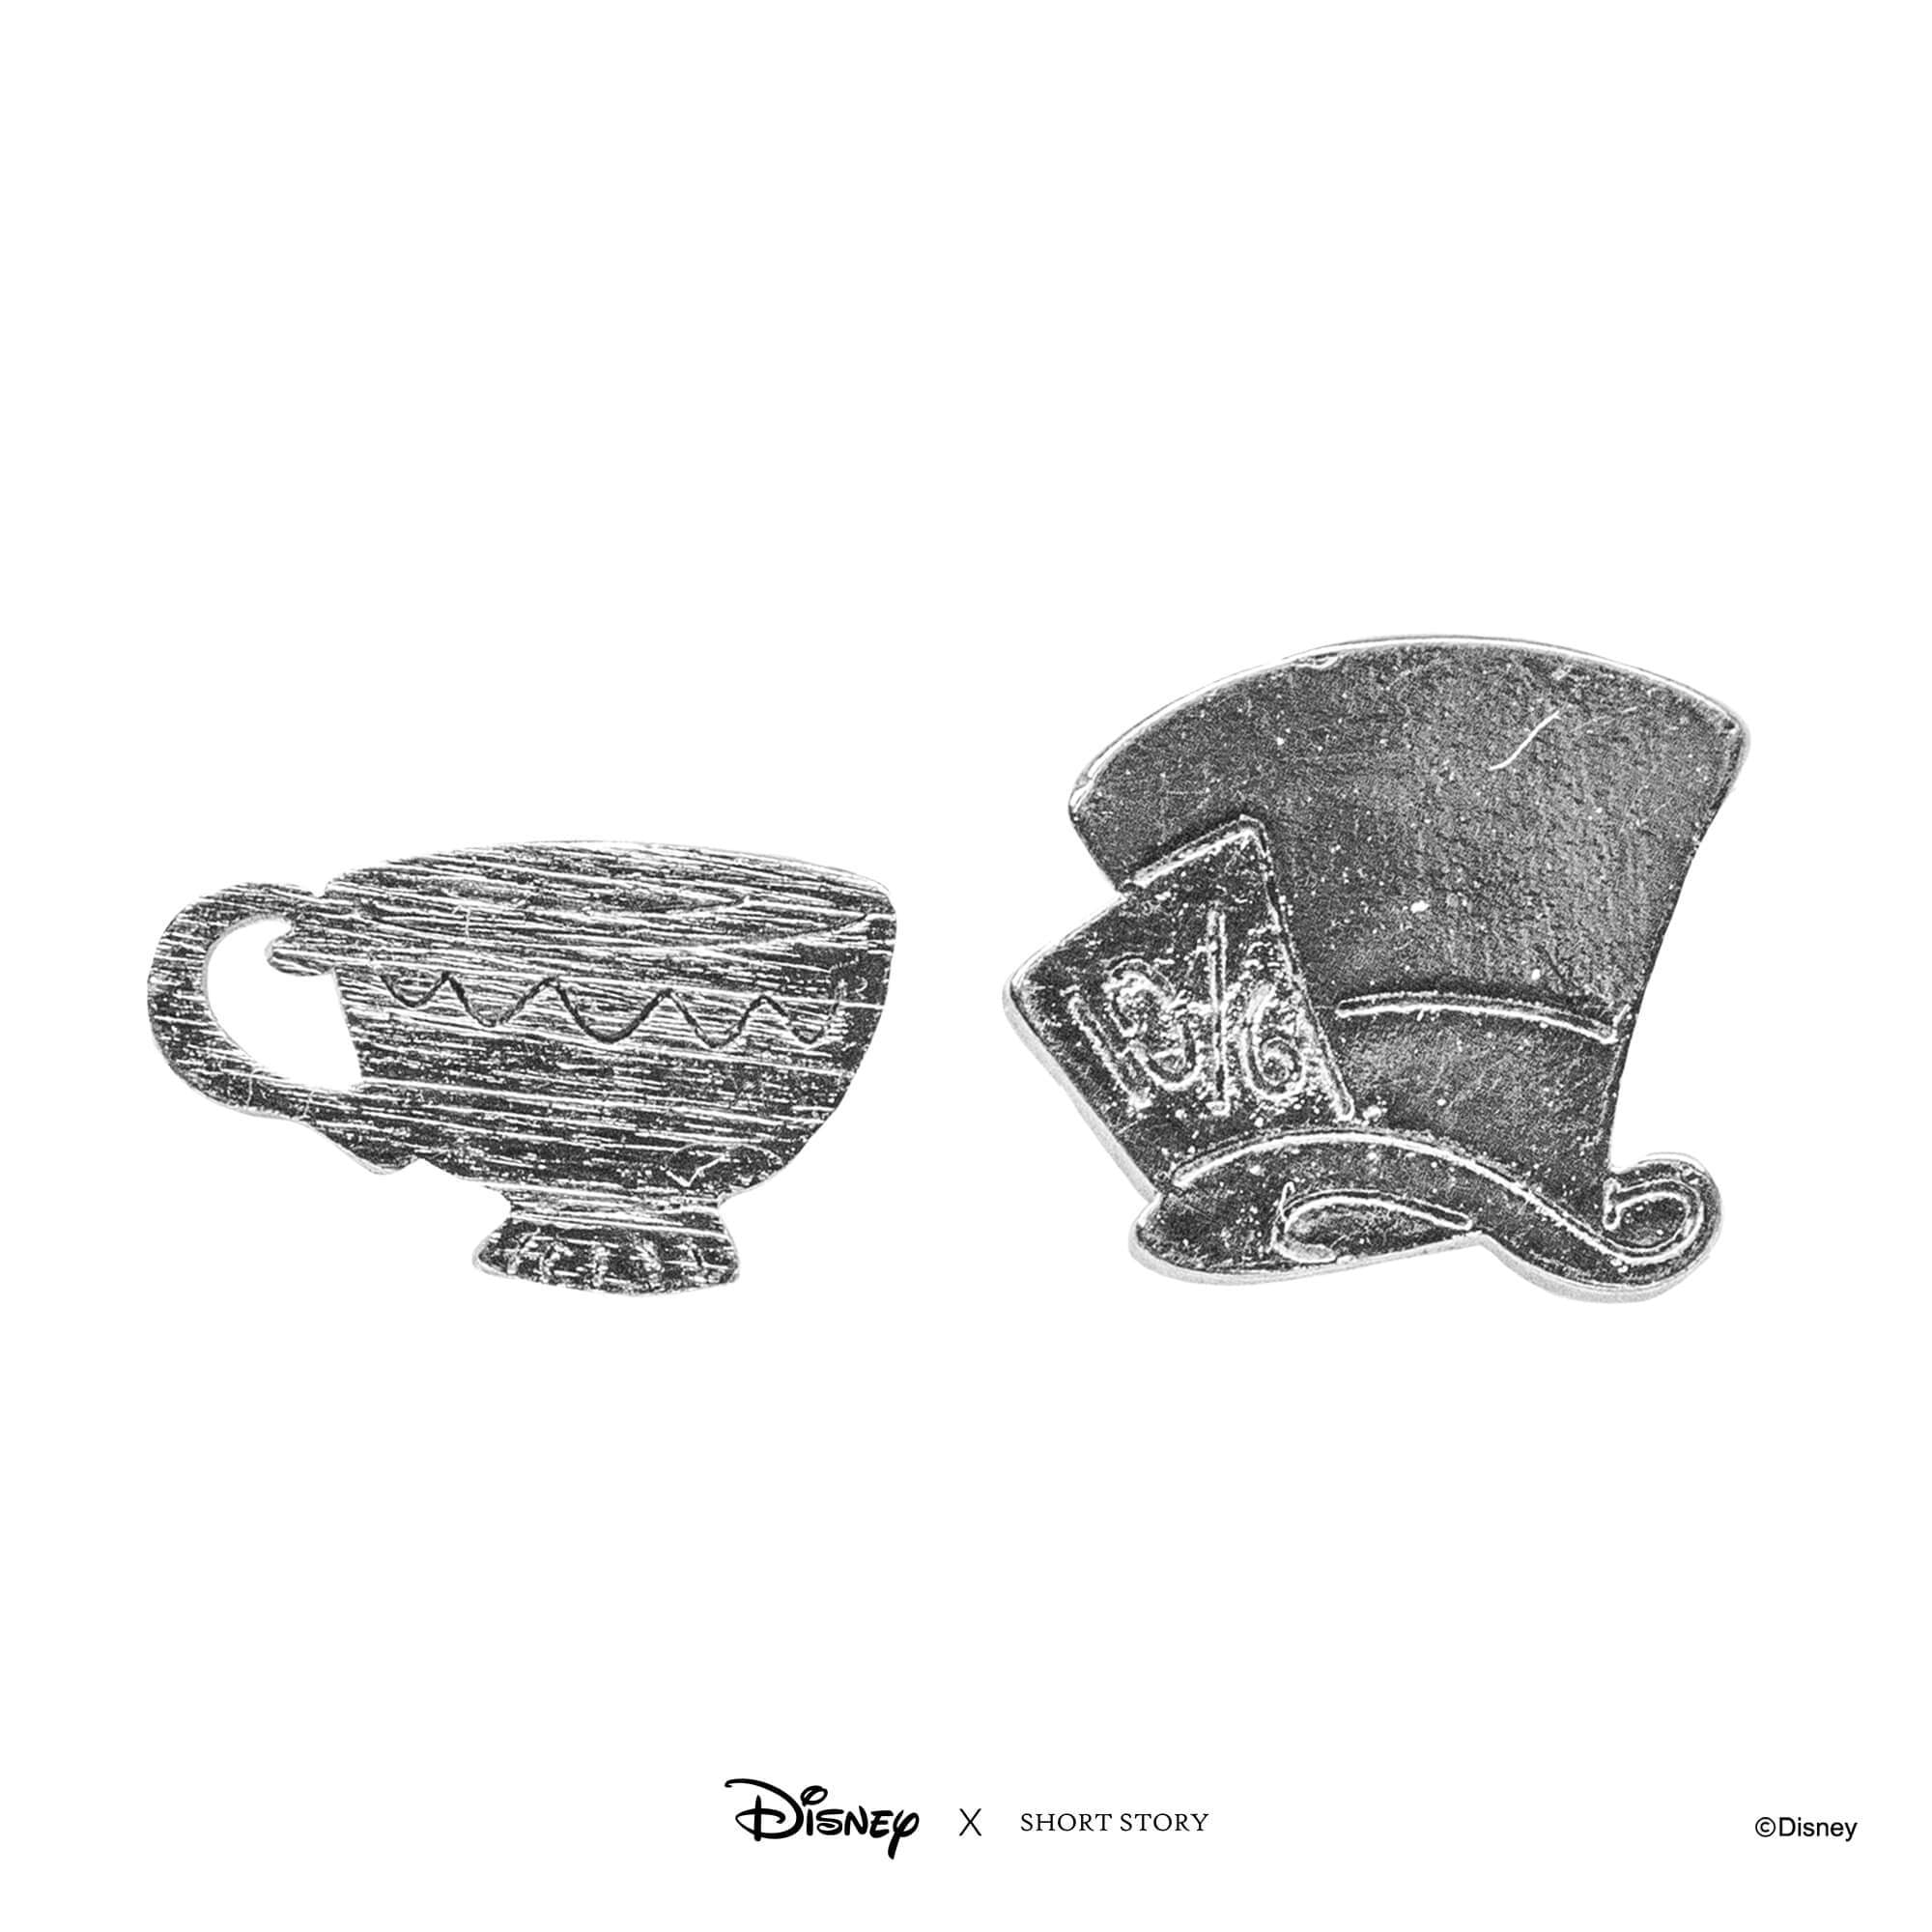 Disney Earring Mad Hat and Teacup